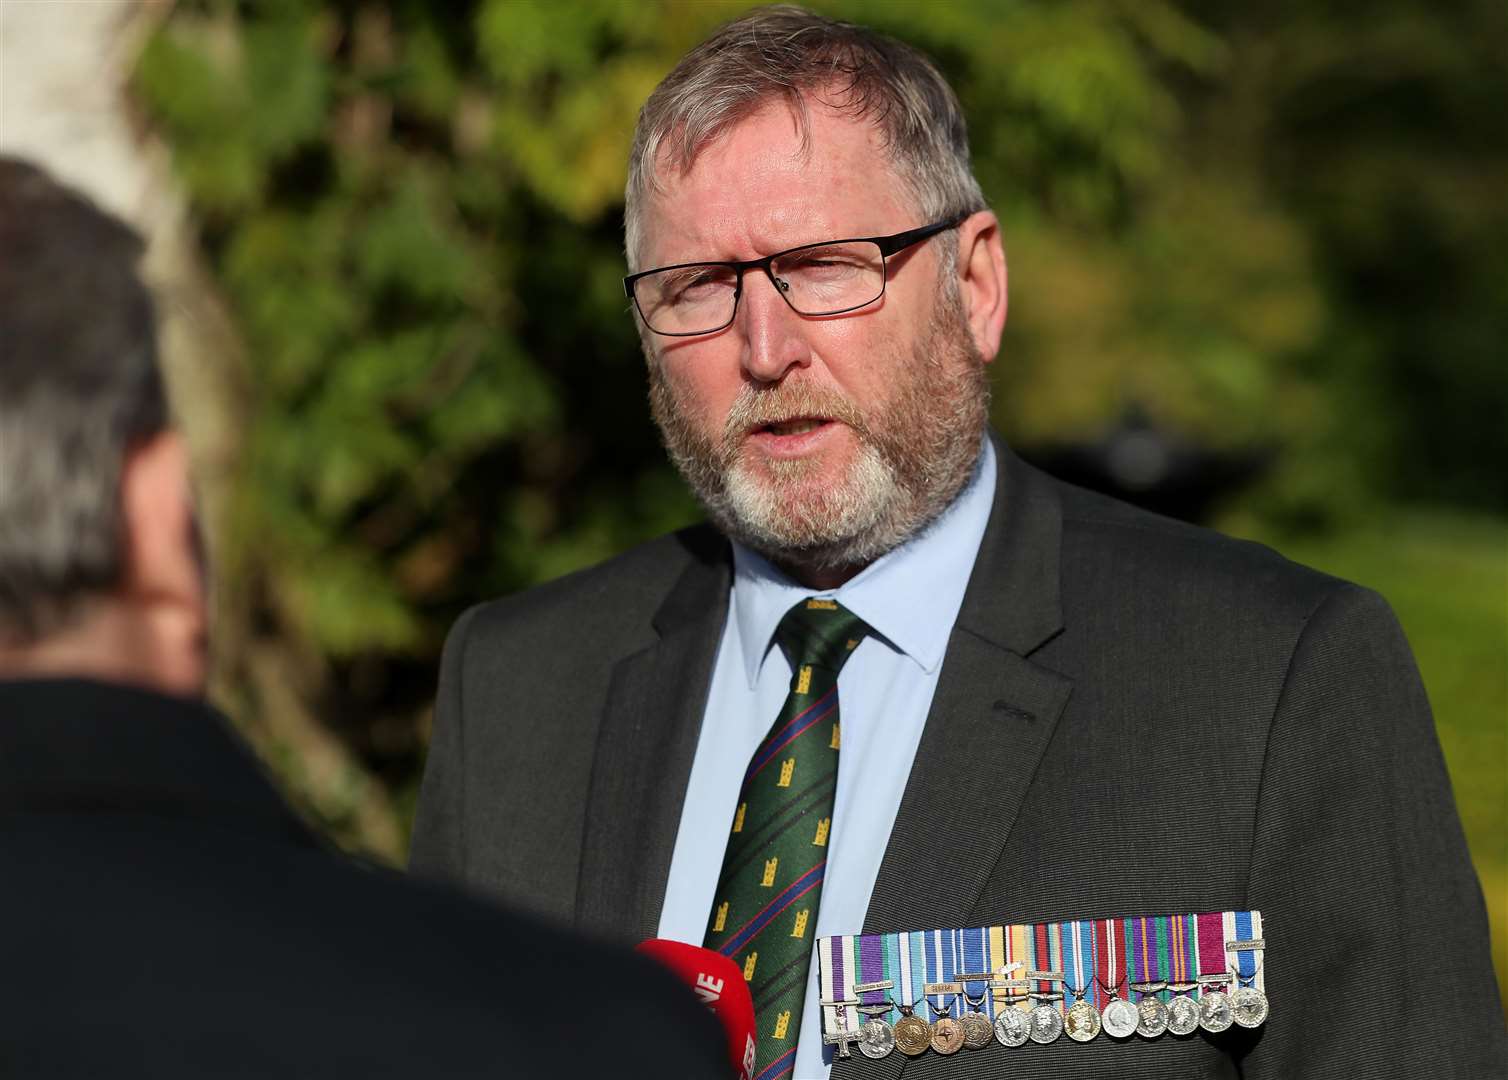 UUP leader Doug Beattie said victims had been let down time and time again (Brian Lawless/PA)